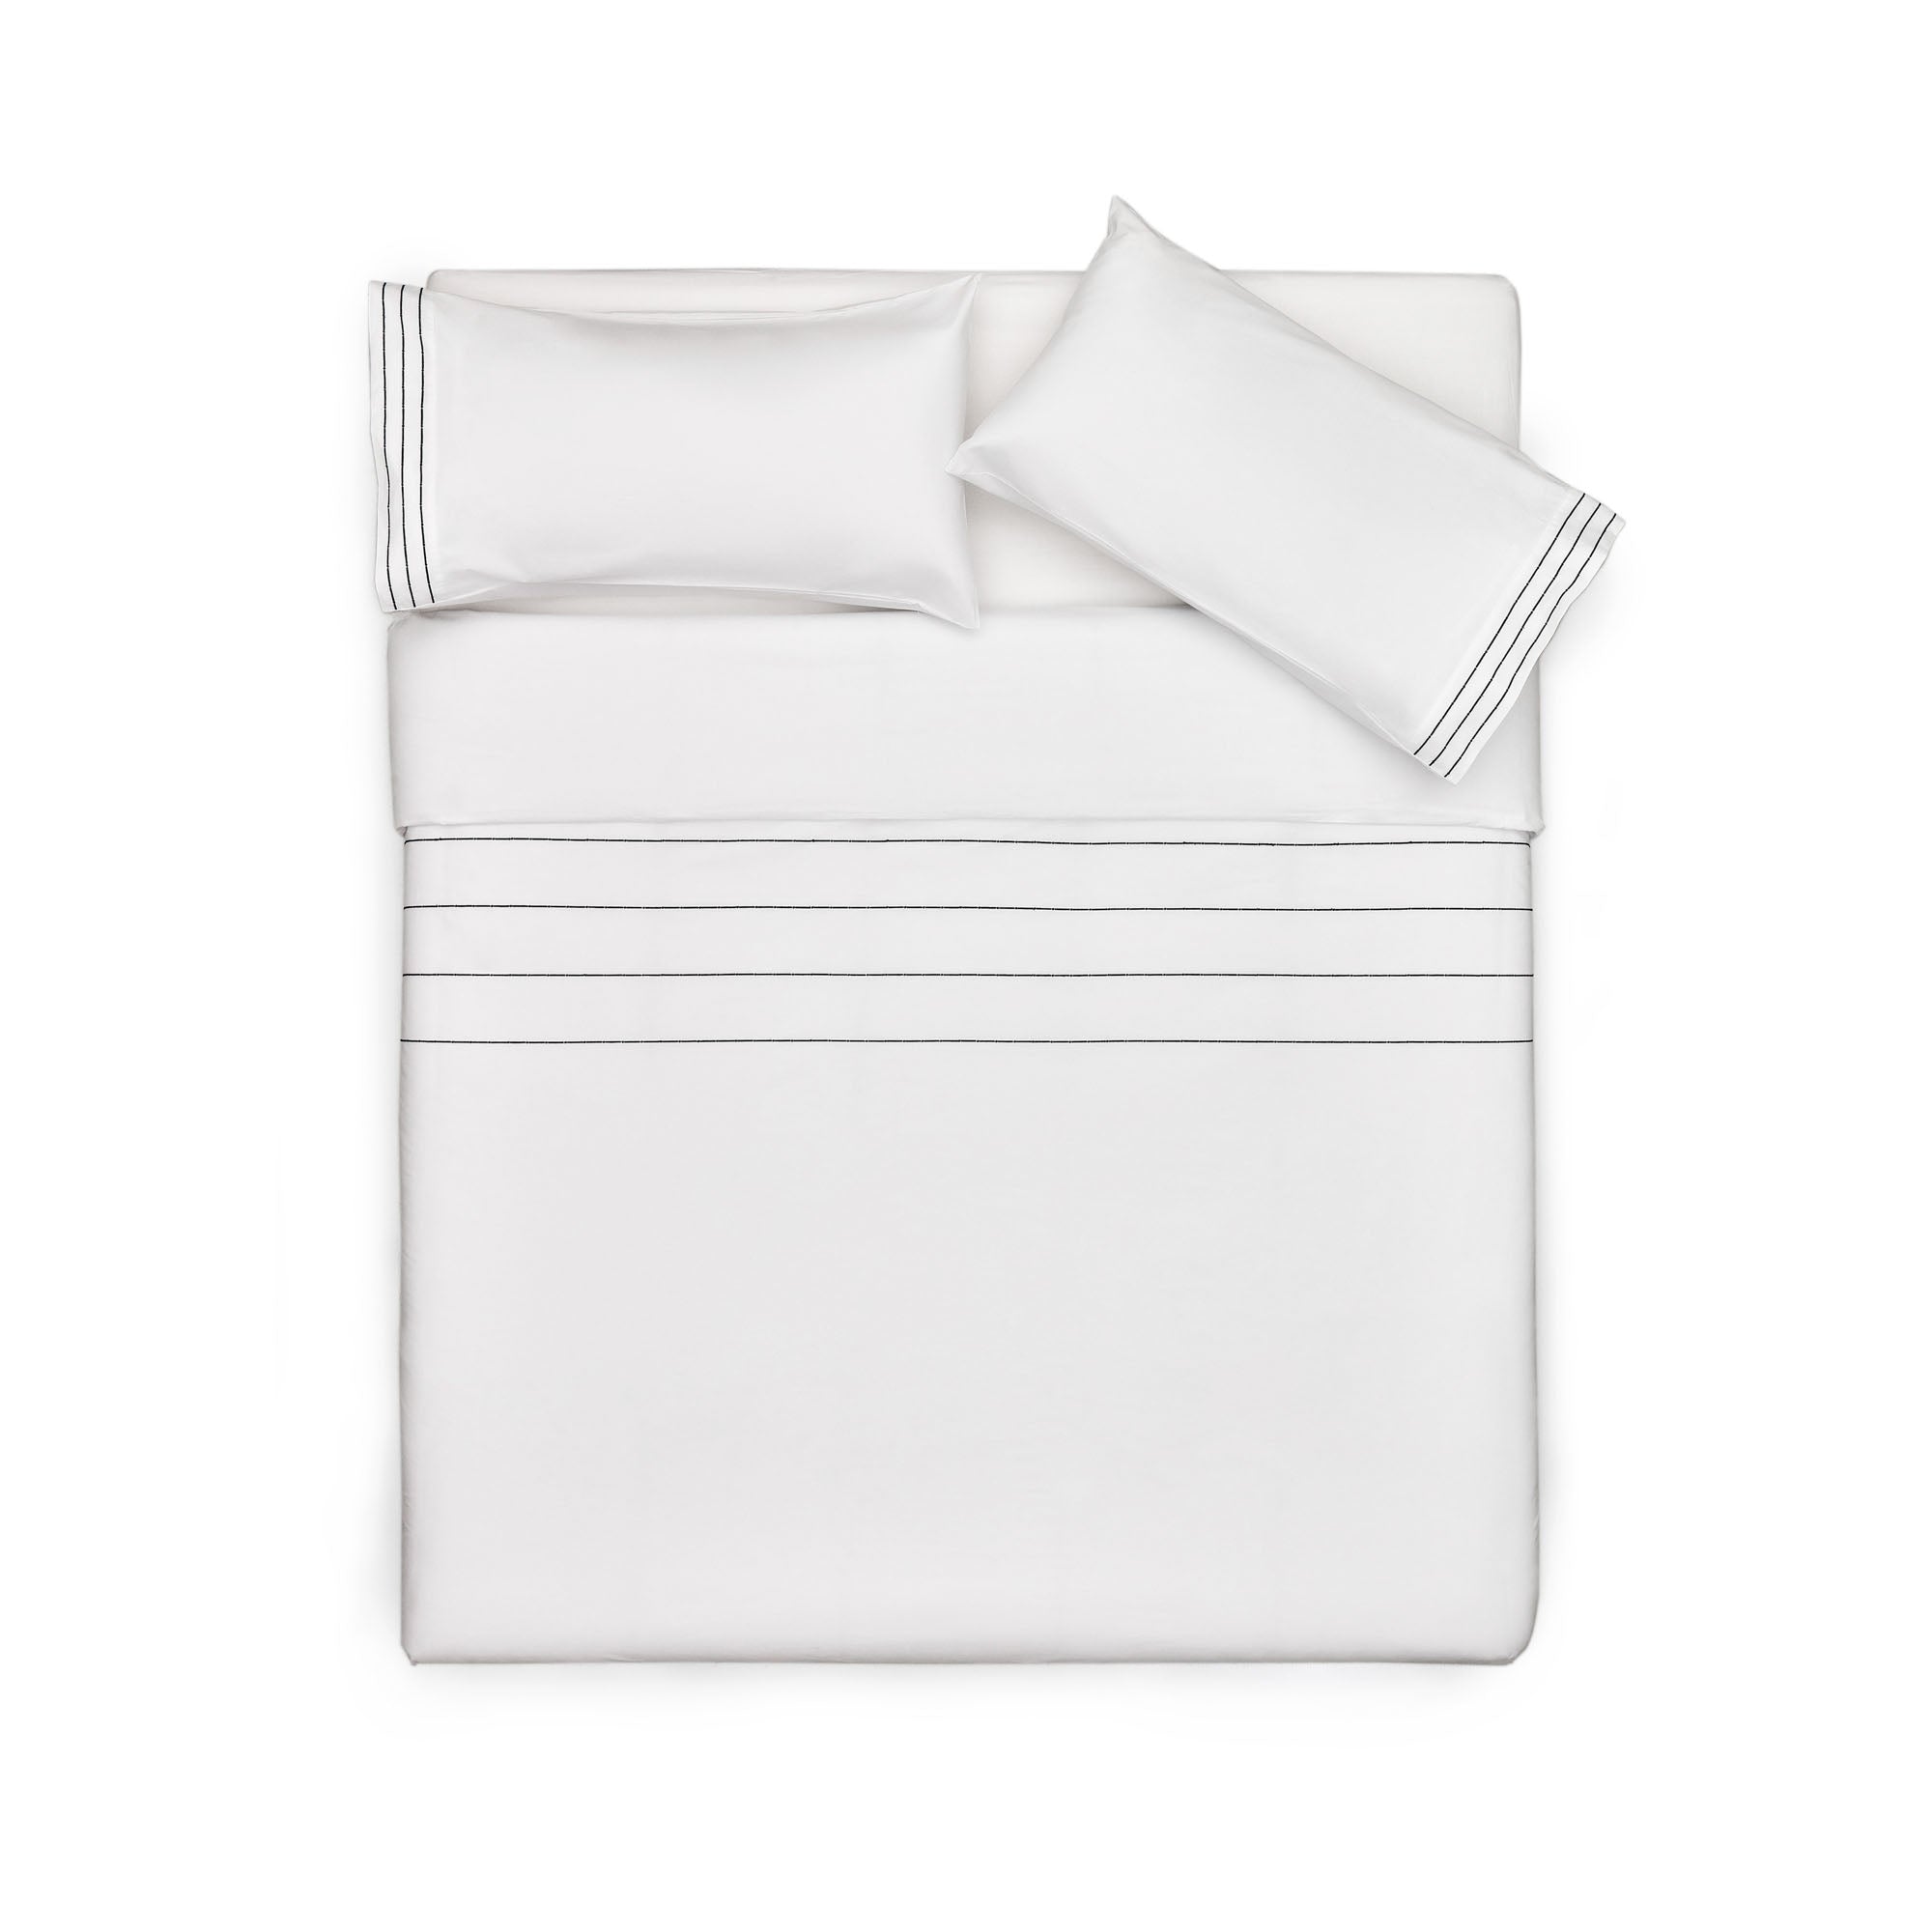 Cintia cotton percale duvet cover and pillowcase in white with striped embroidery, 180 x 200cm